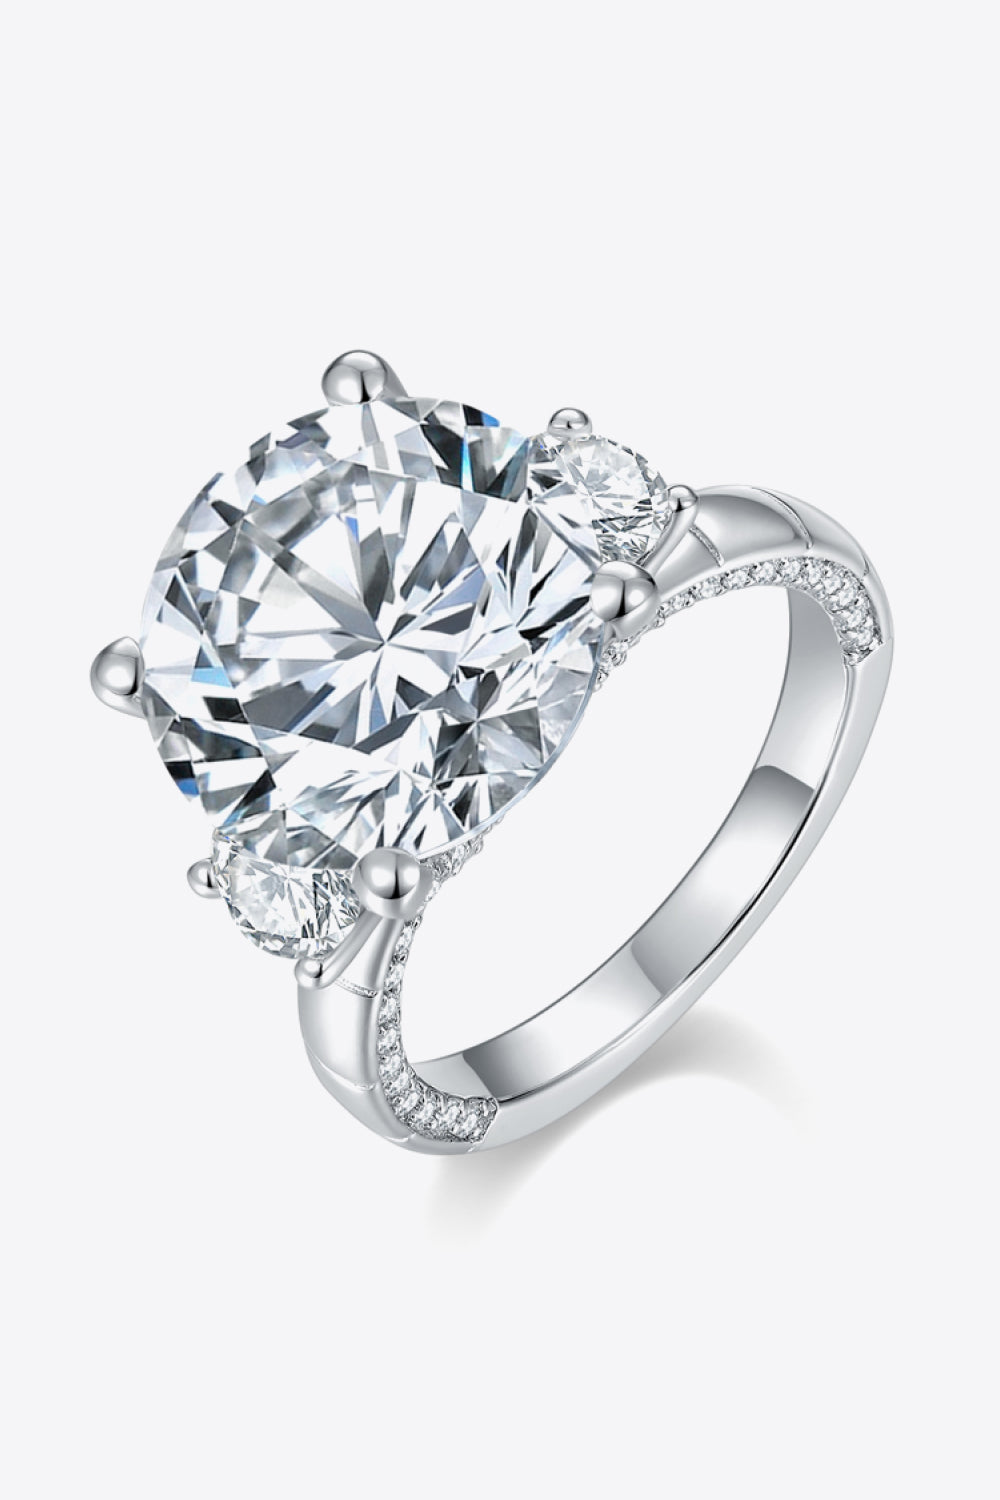 8.6 Carat Moissanite Platinum-Plated Ring-Rings-Inspired by Justeen-Women's Clothing Boutique in Chicago, Illinois